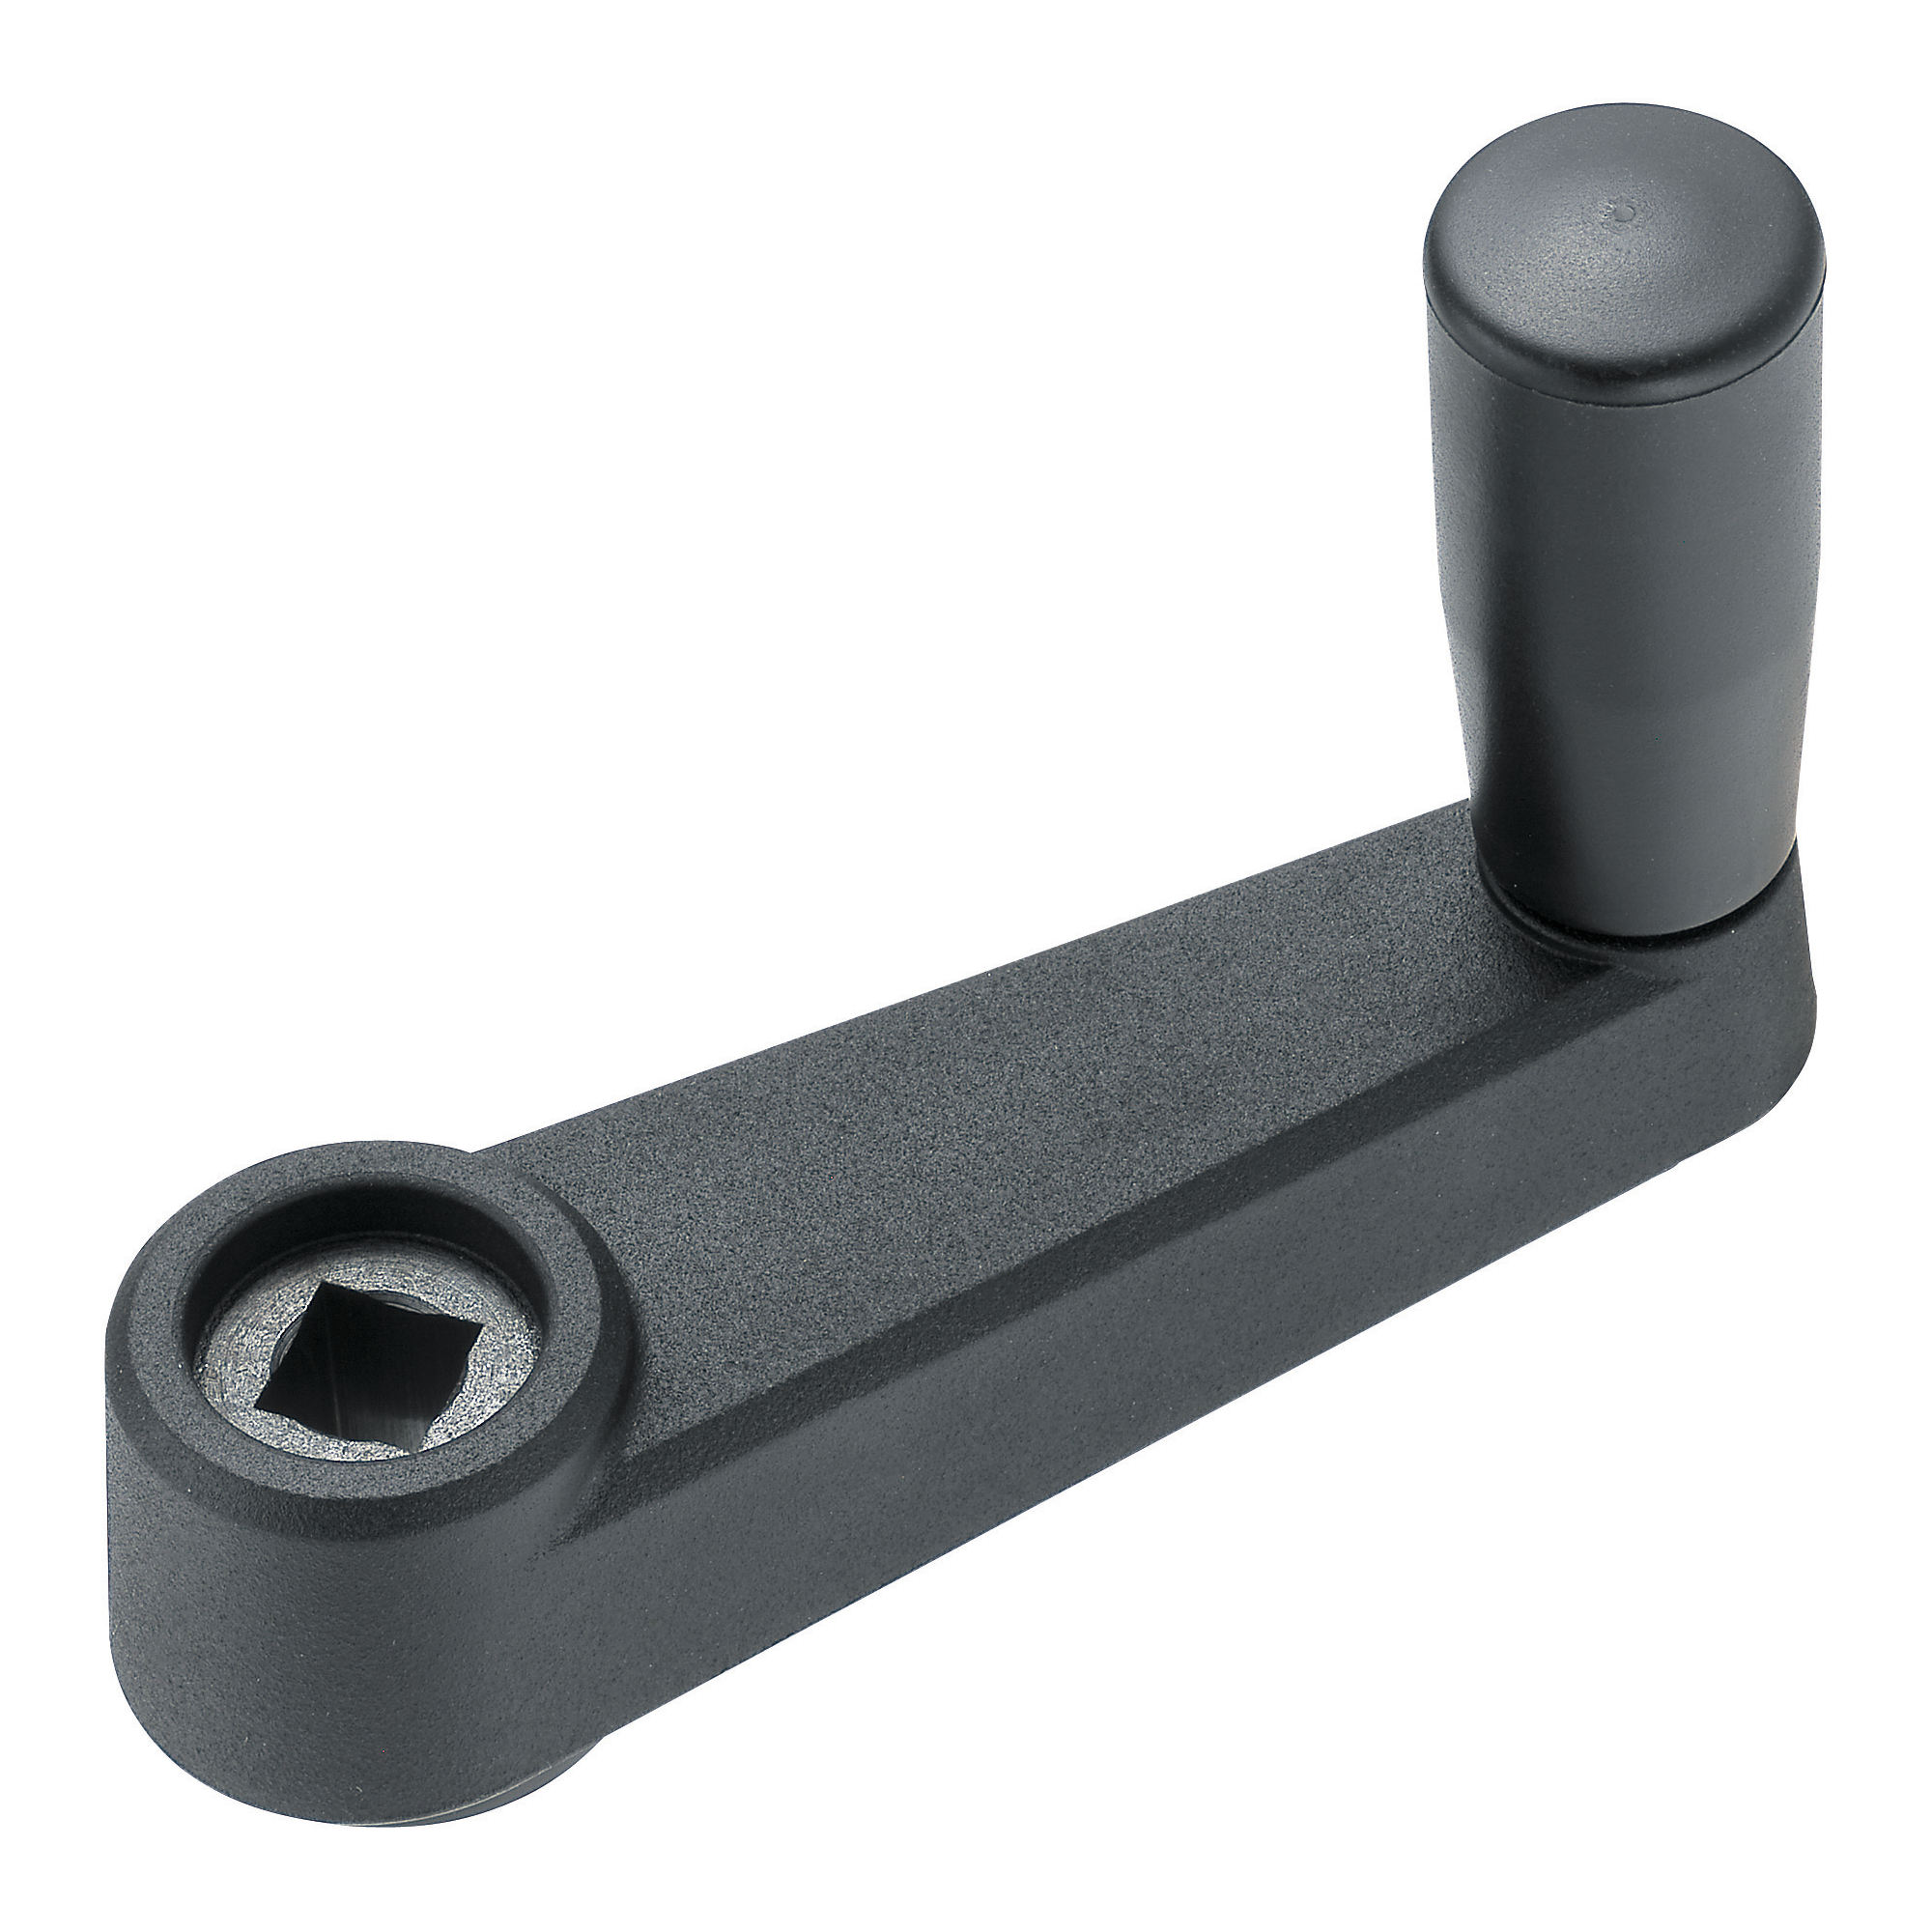 Offset Cast Iron Cranking Handle with Square Hole